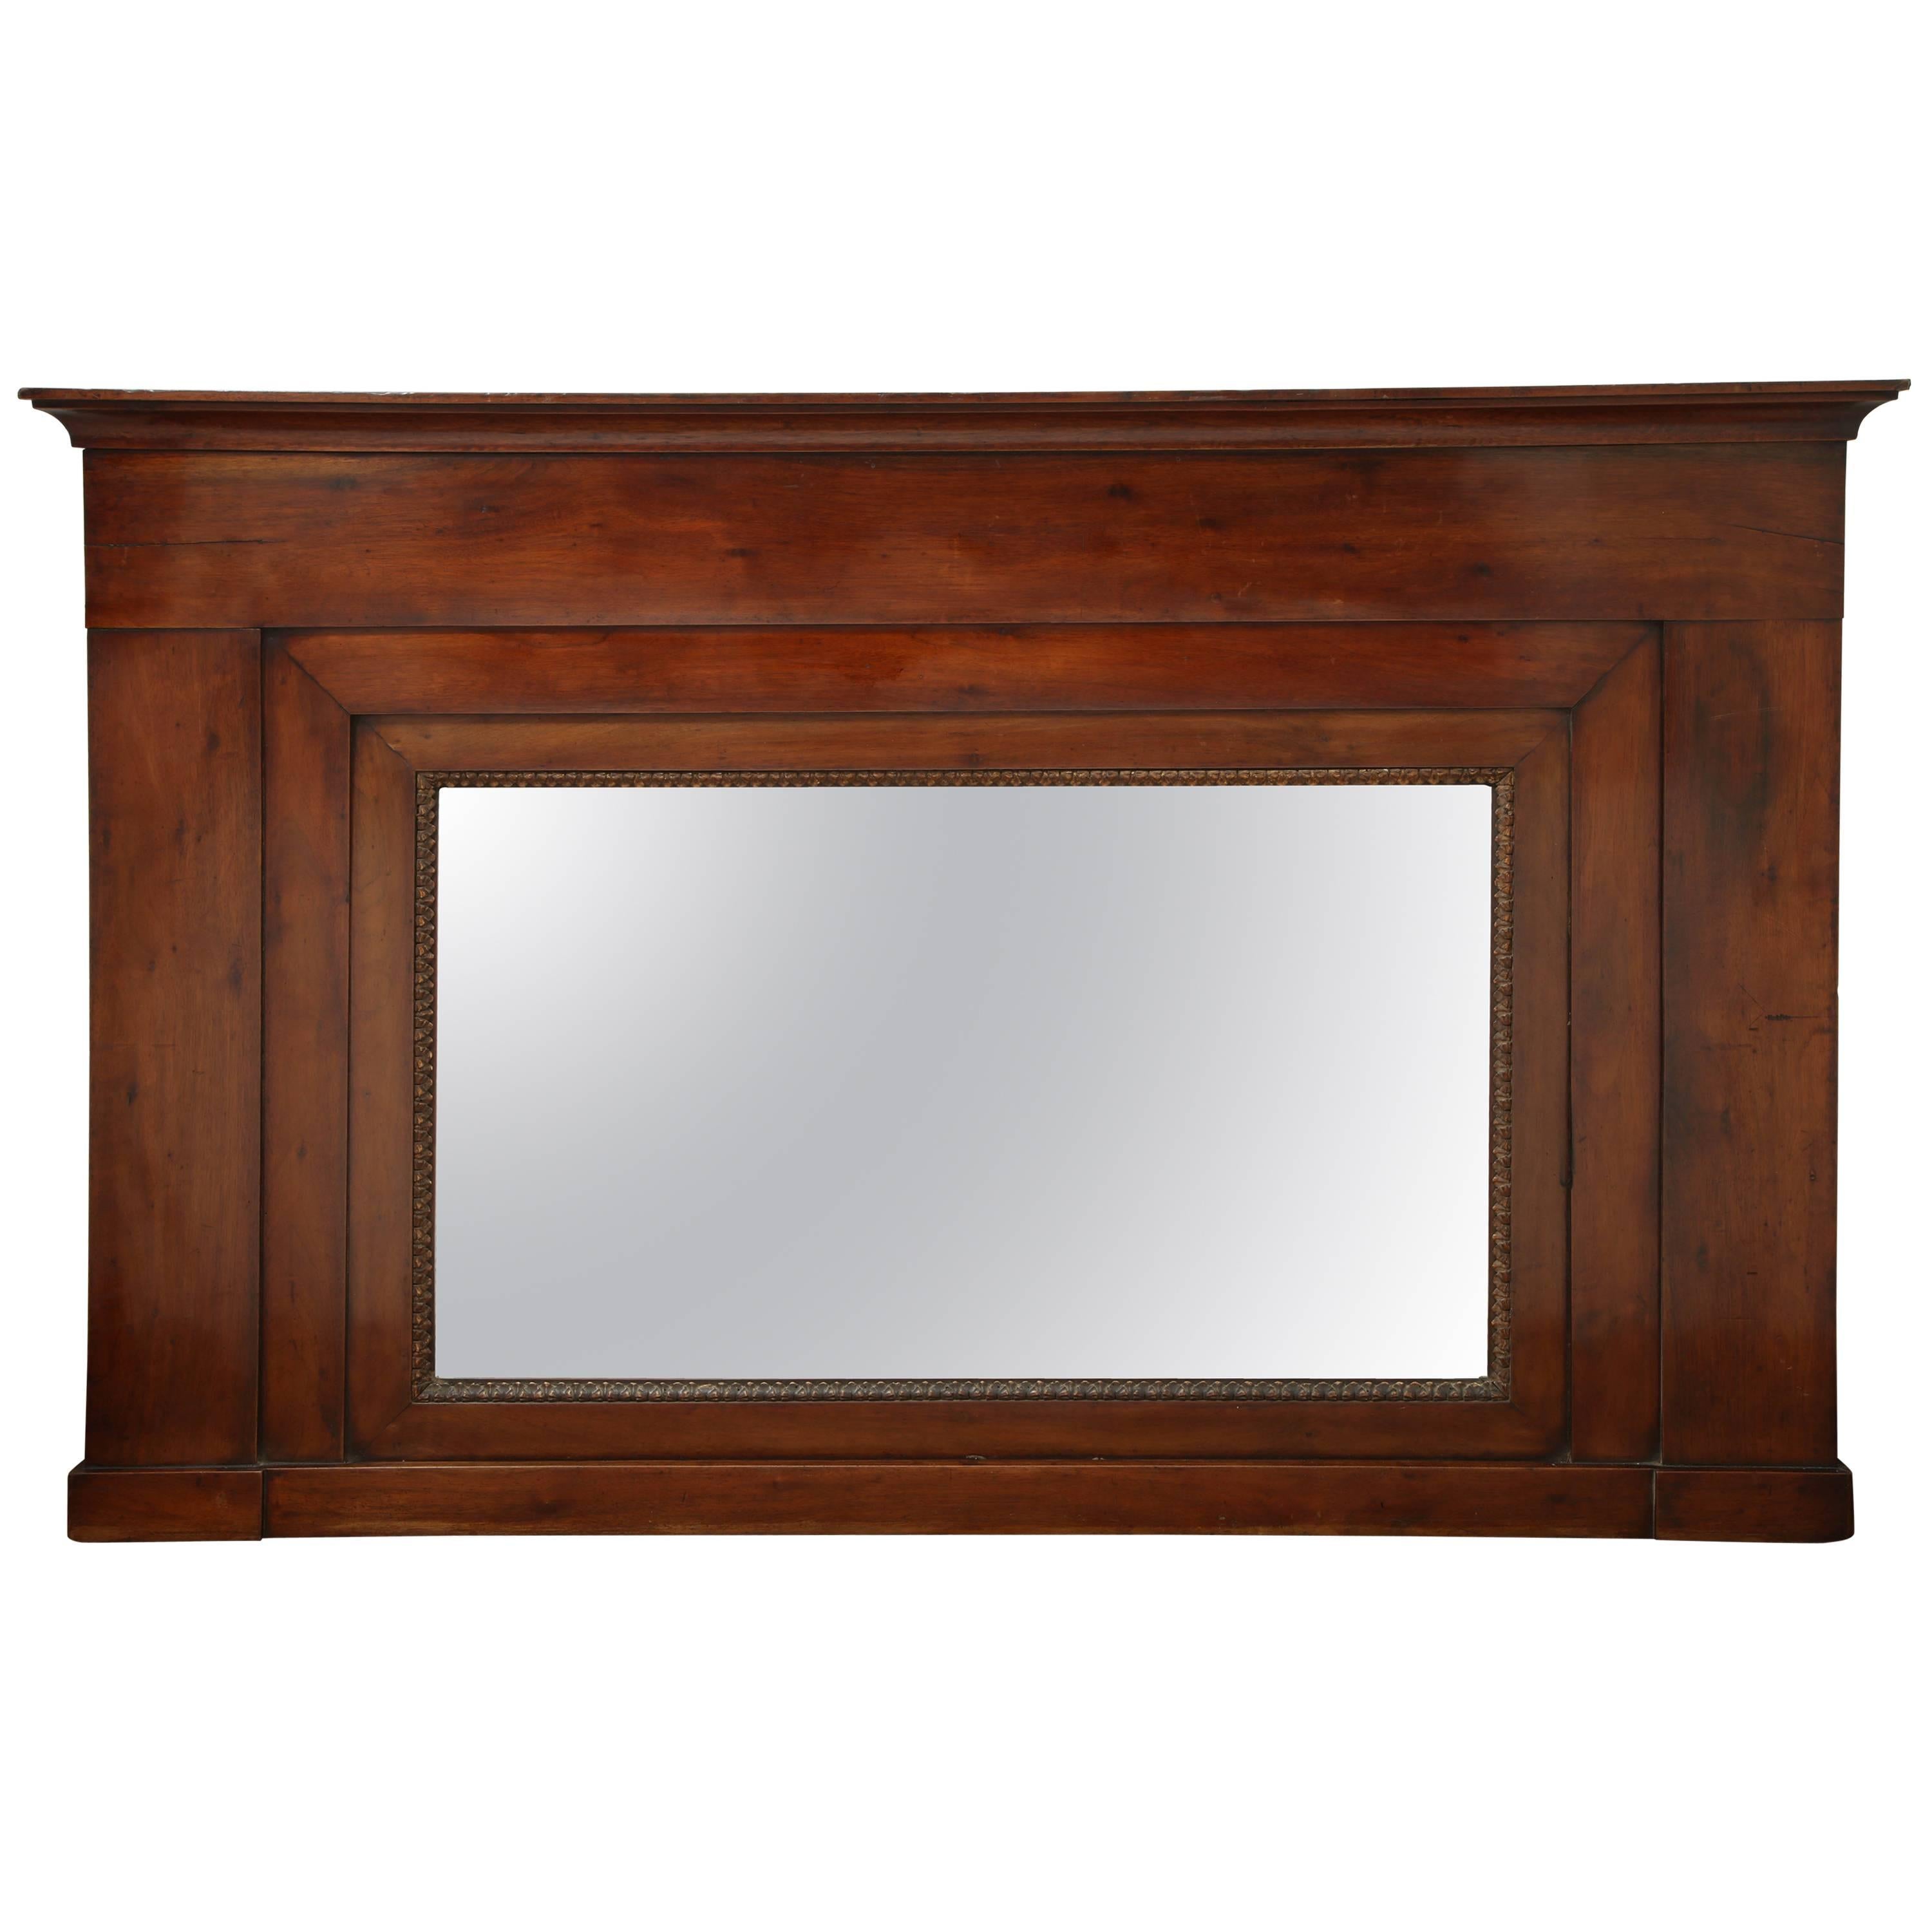 Early 19th Century French, Fruitwood Mirror For Sale